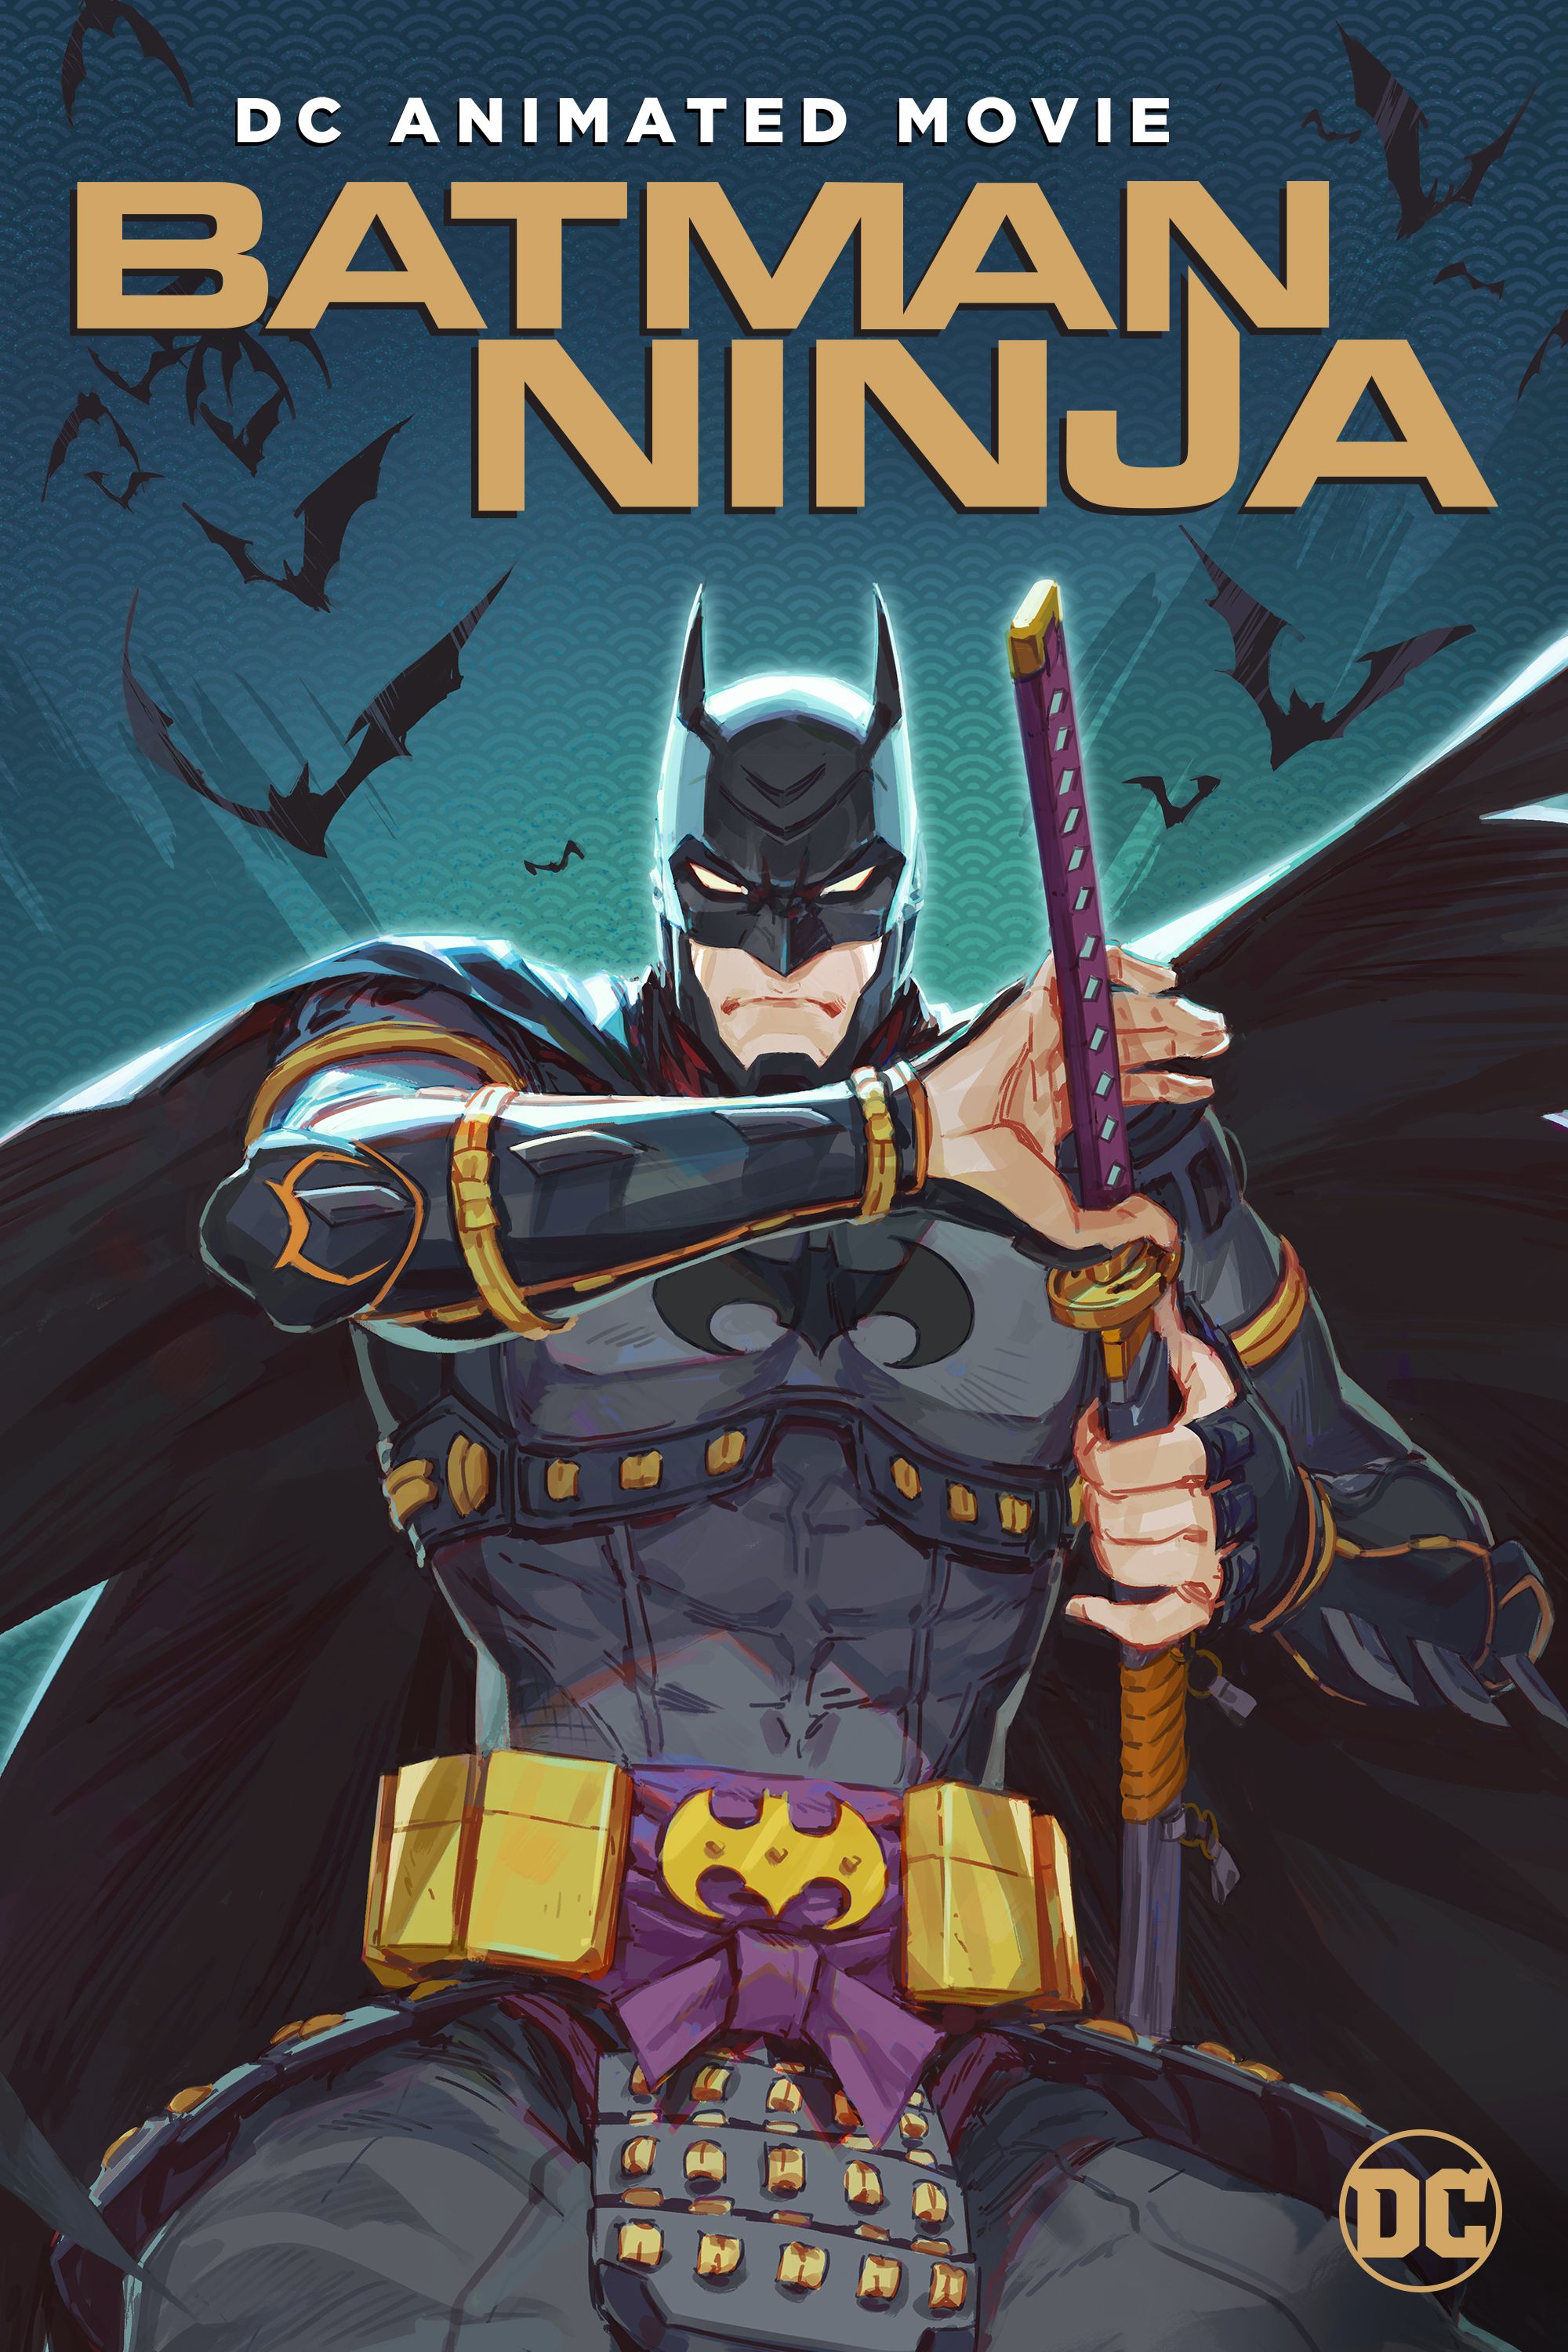 The New Batman Ninja Anime Movie Looks Exactly As Awesome As It Sounds